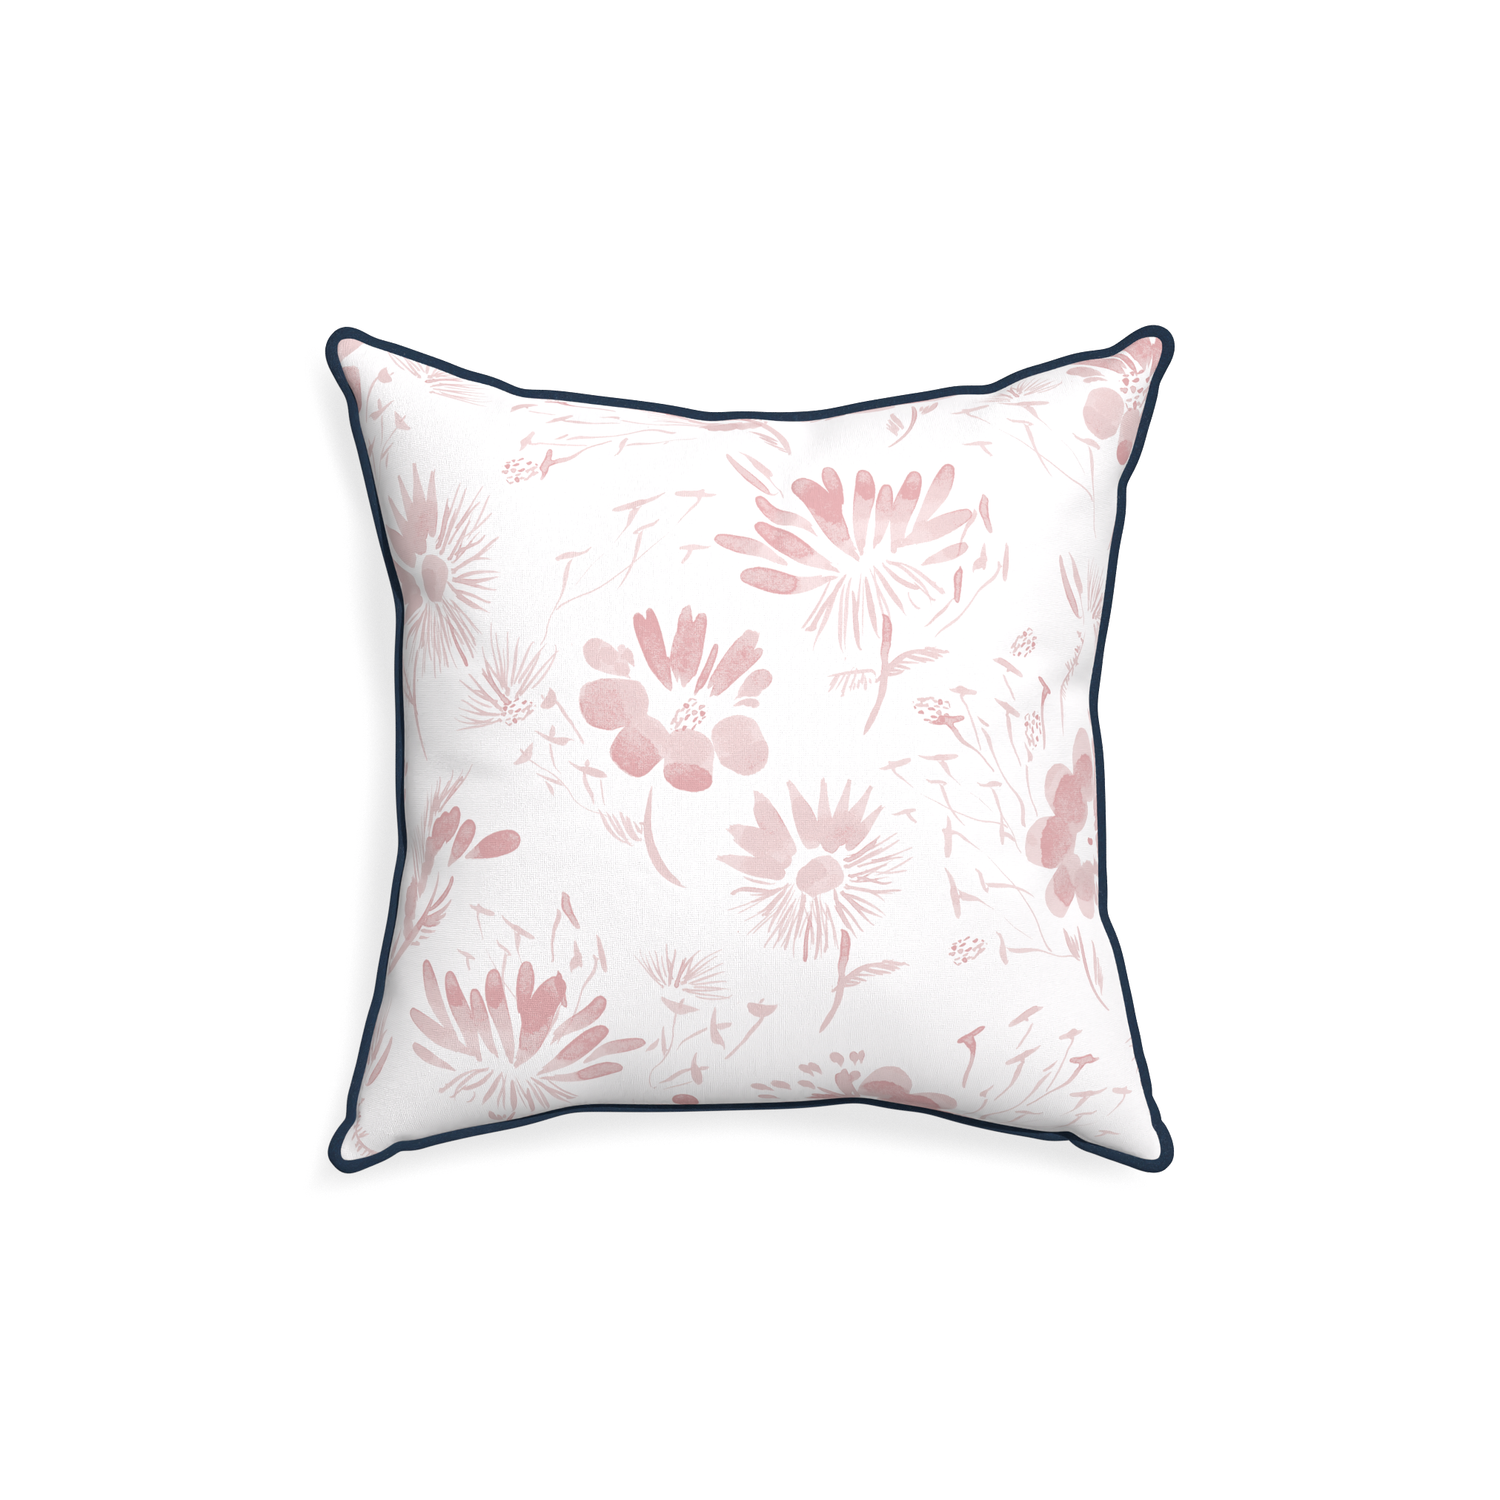 18-square blake custom pink floralpillow with c piping on white background